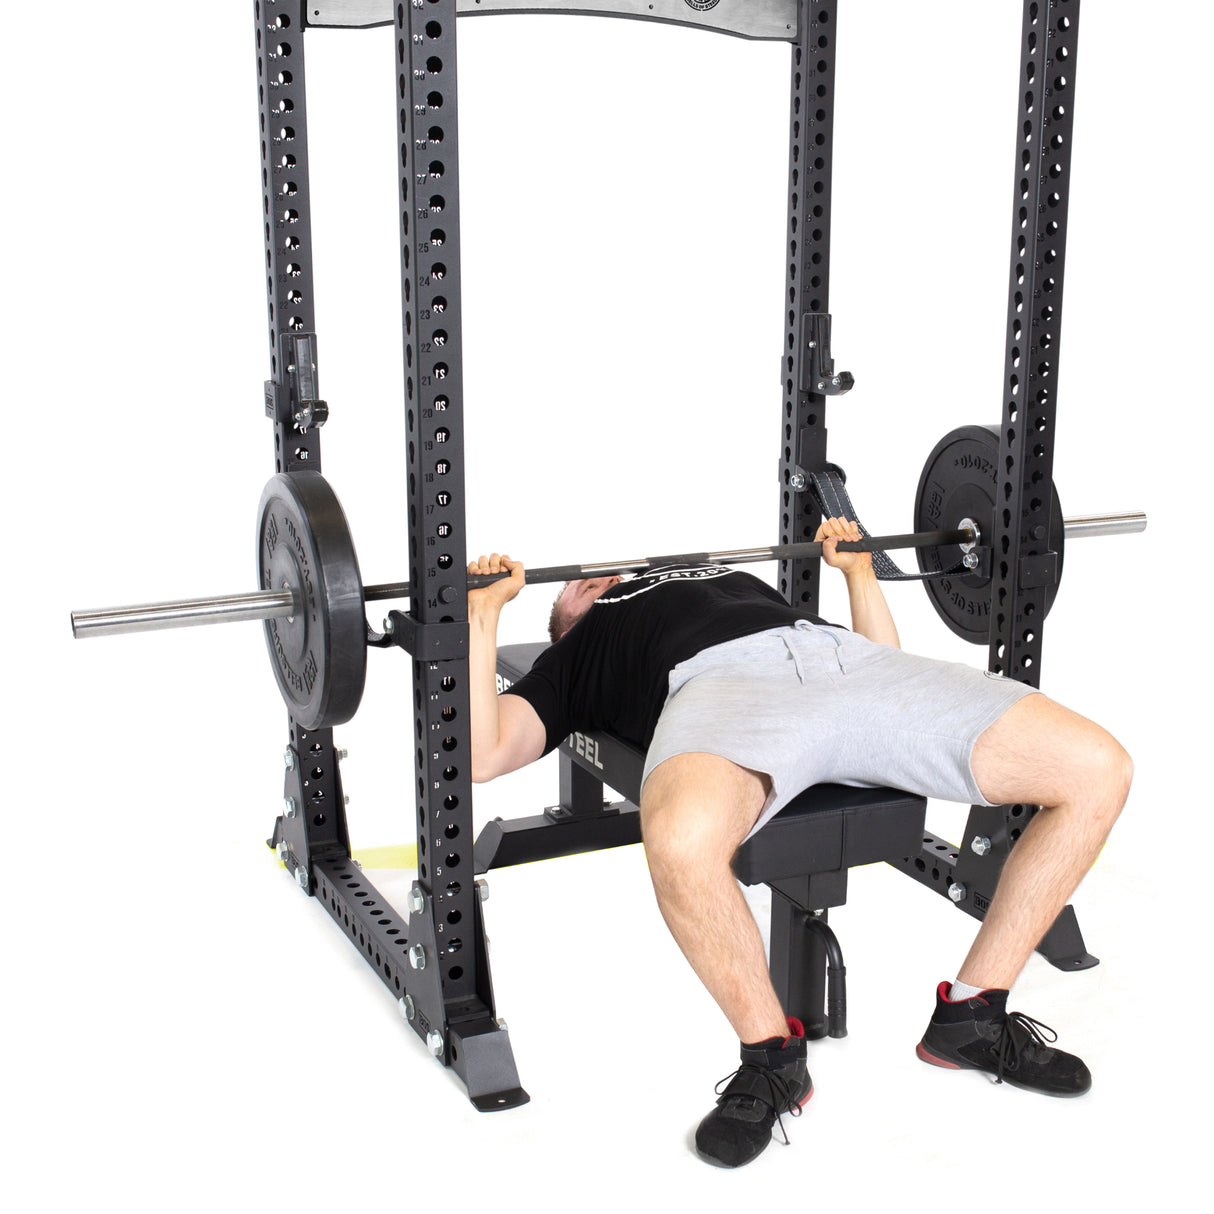 Male athlete doing bench press with Manticore Flat Foot Power Rack PREBUILT